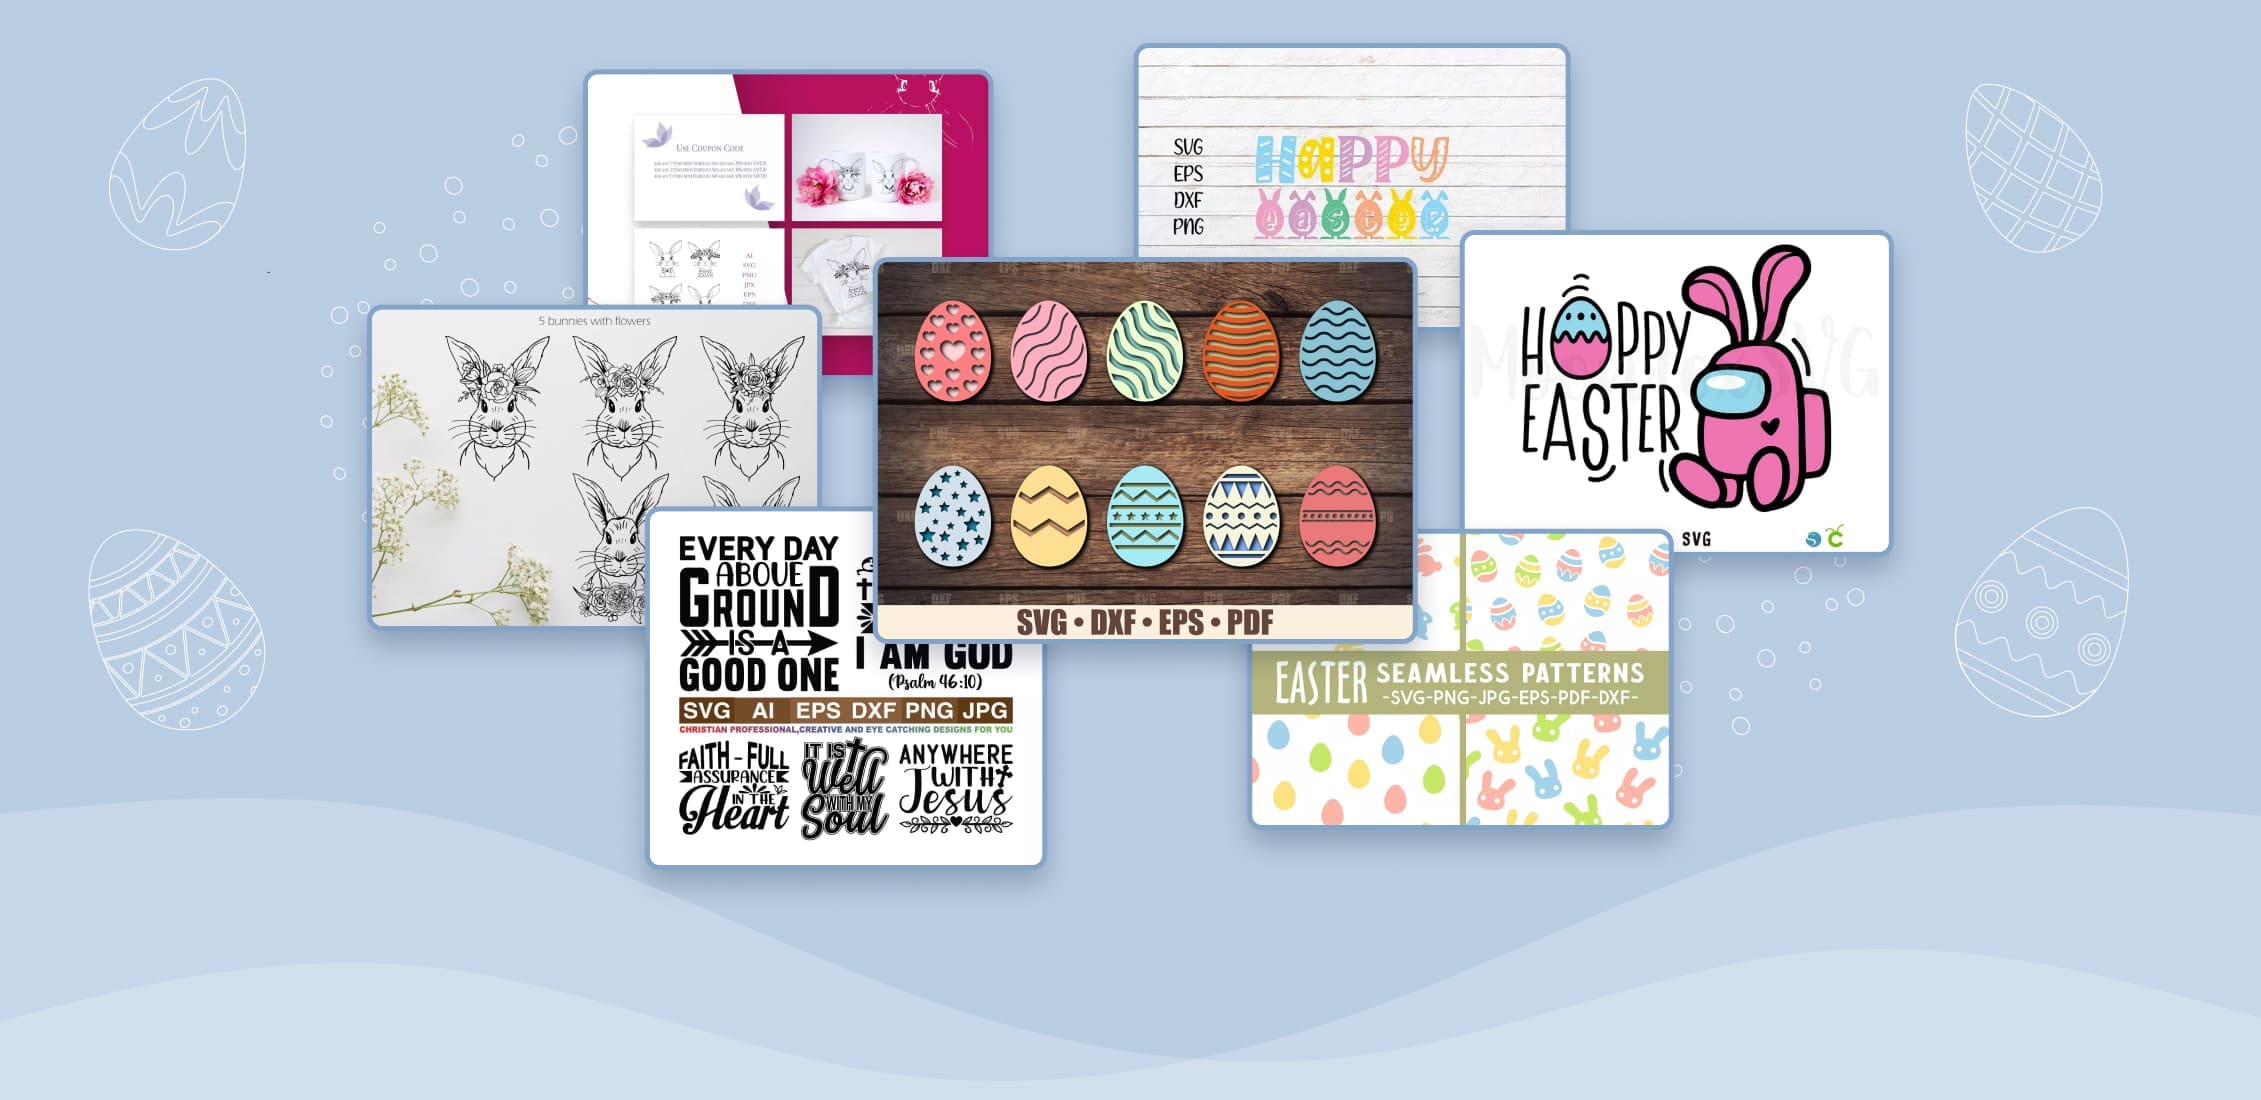 High resolution PNG JPG 6 Happy Easter Clipart Instant download digital vectors Layered SVG Cricut Silhouette cut files Bundle